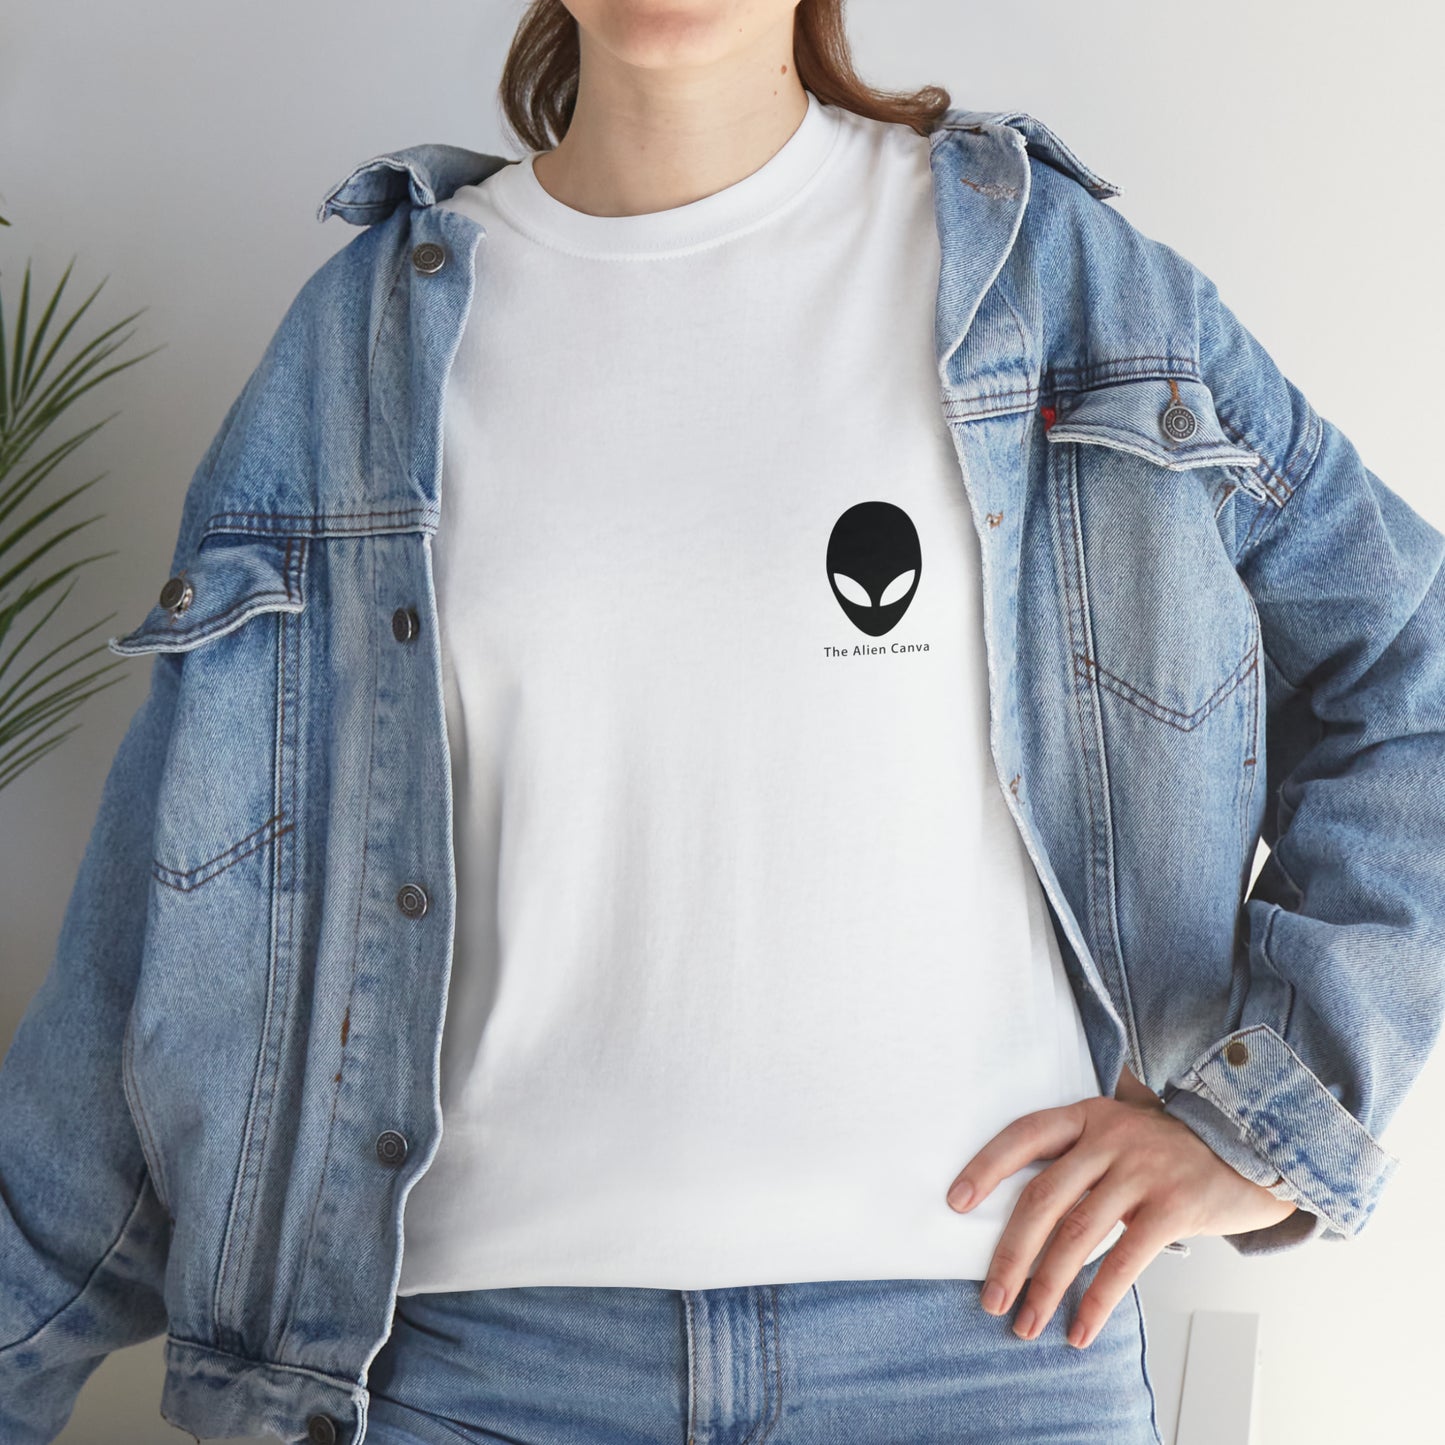 "A Beacon of Hope" - The Alien T-shirt